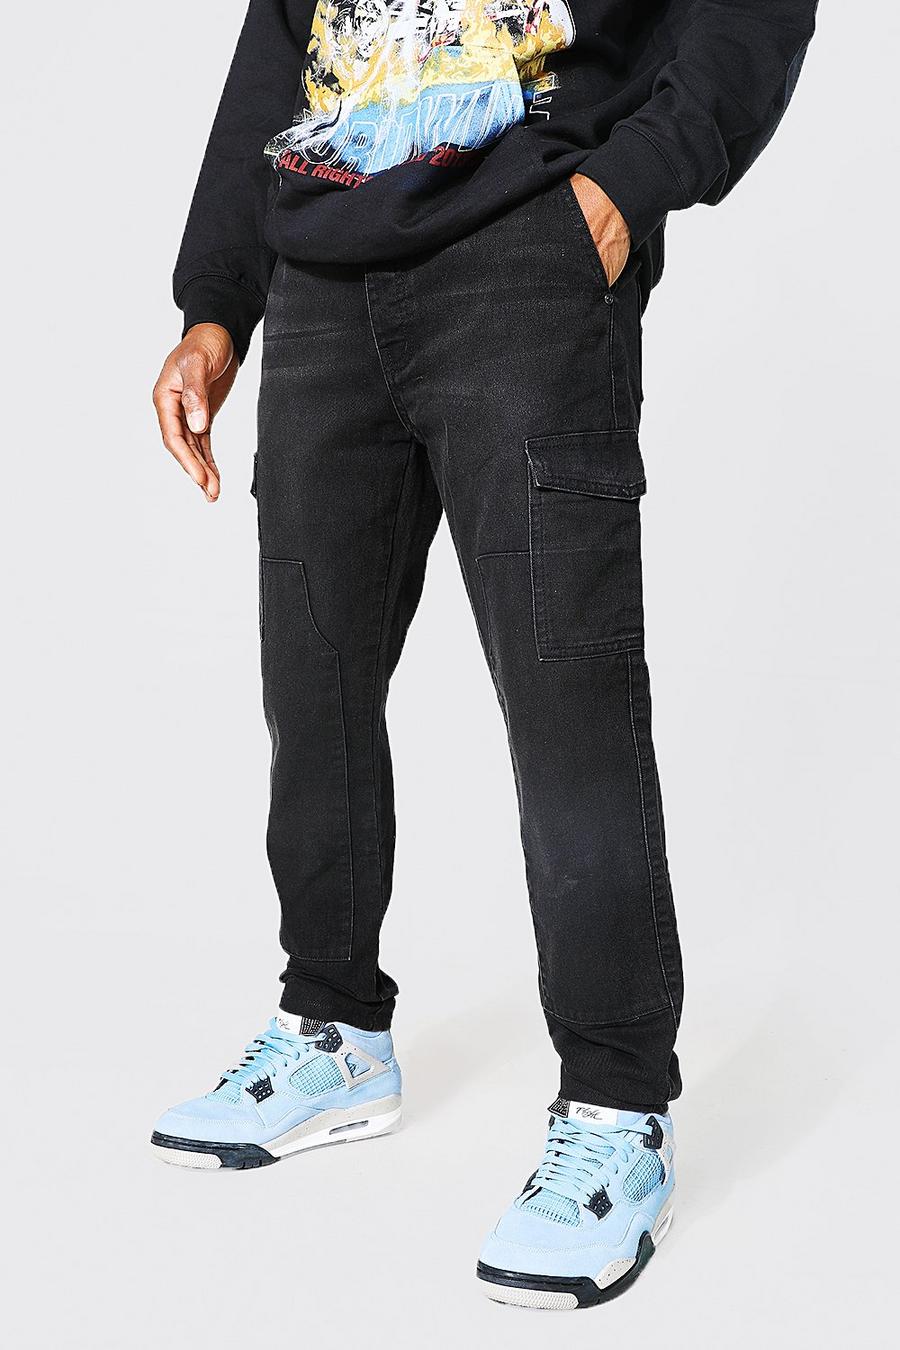 Jean cargo coupe slim à poches multiples, Washed black image number 1